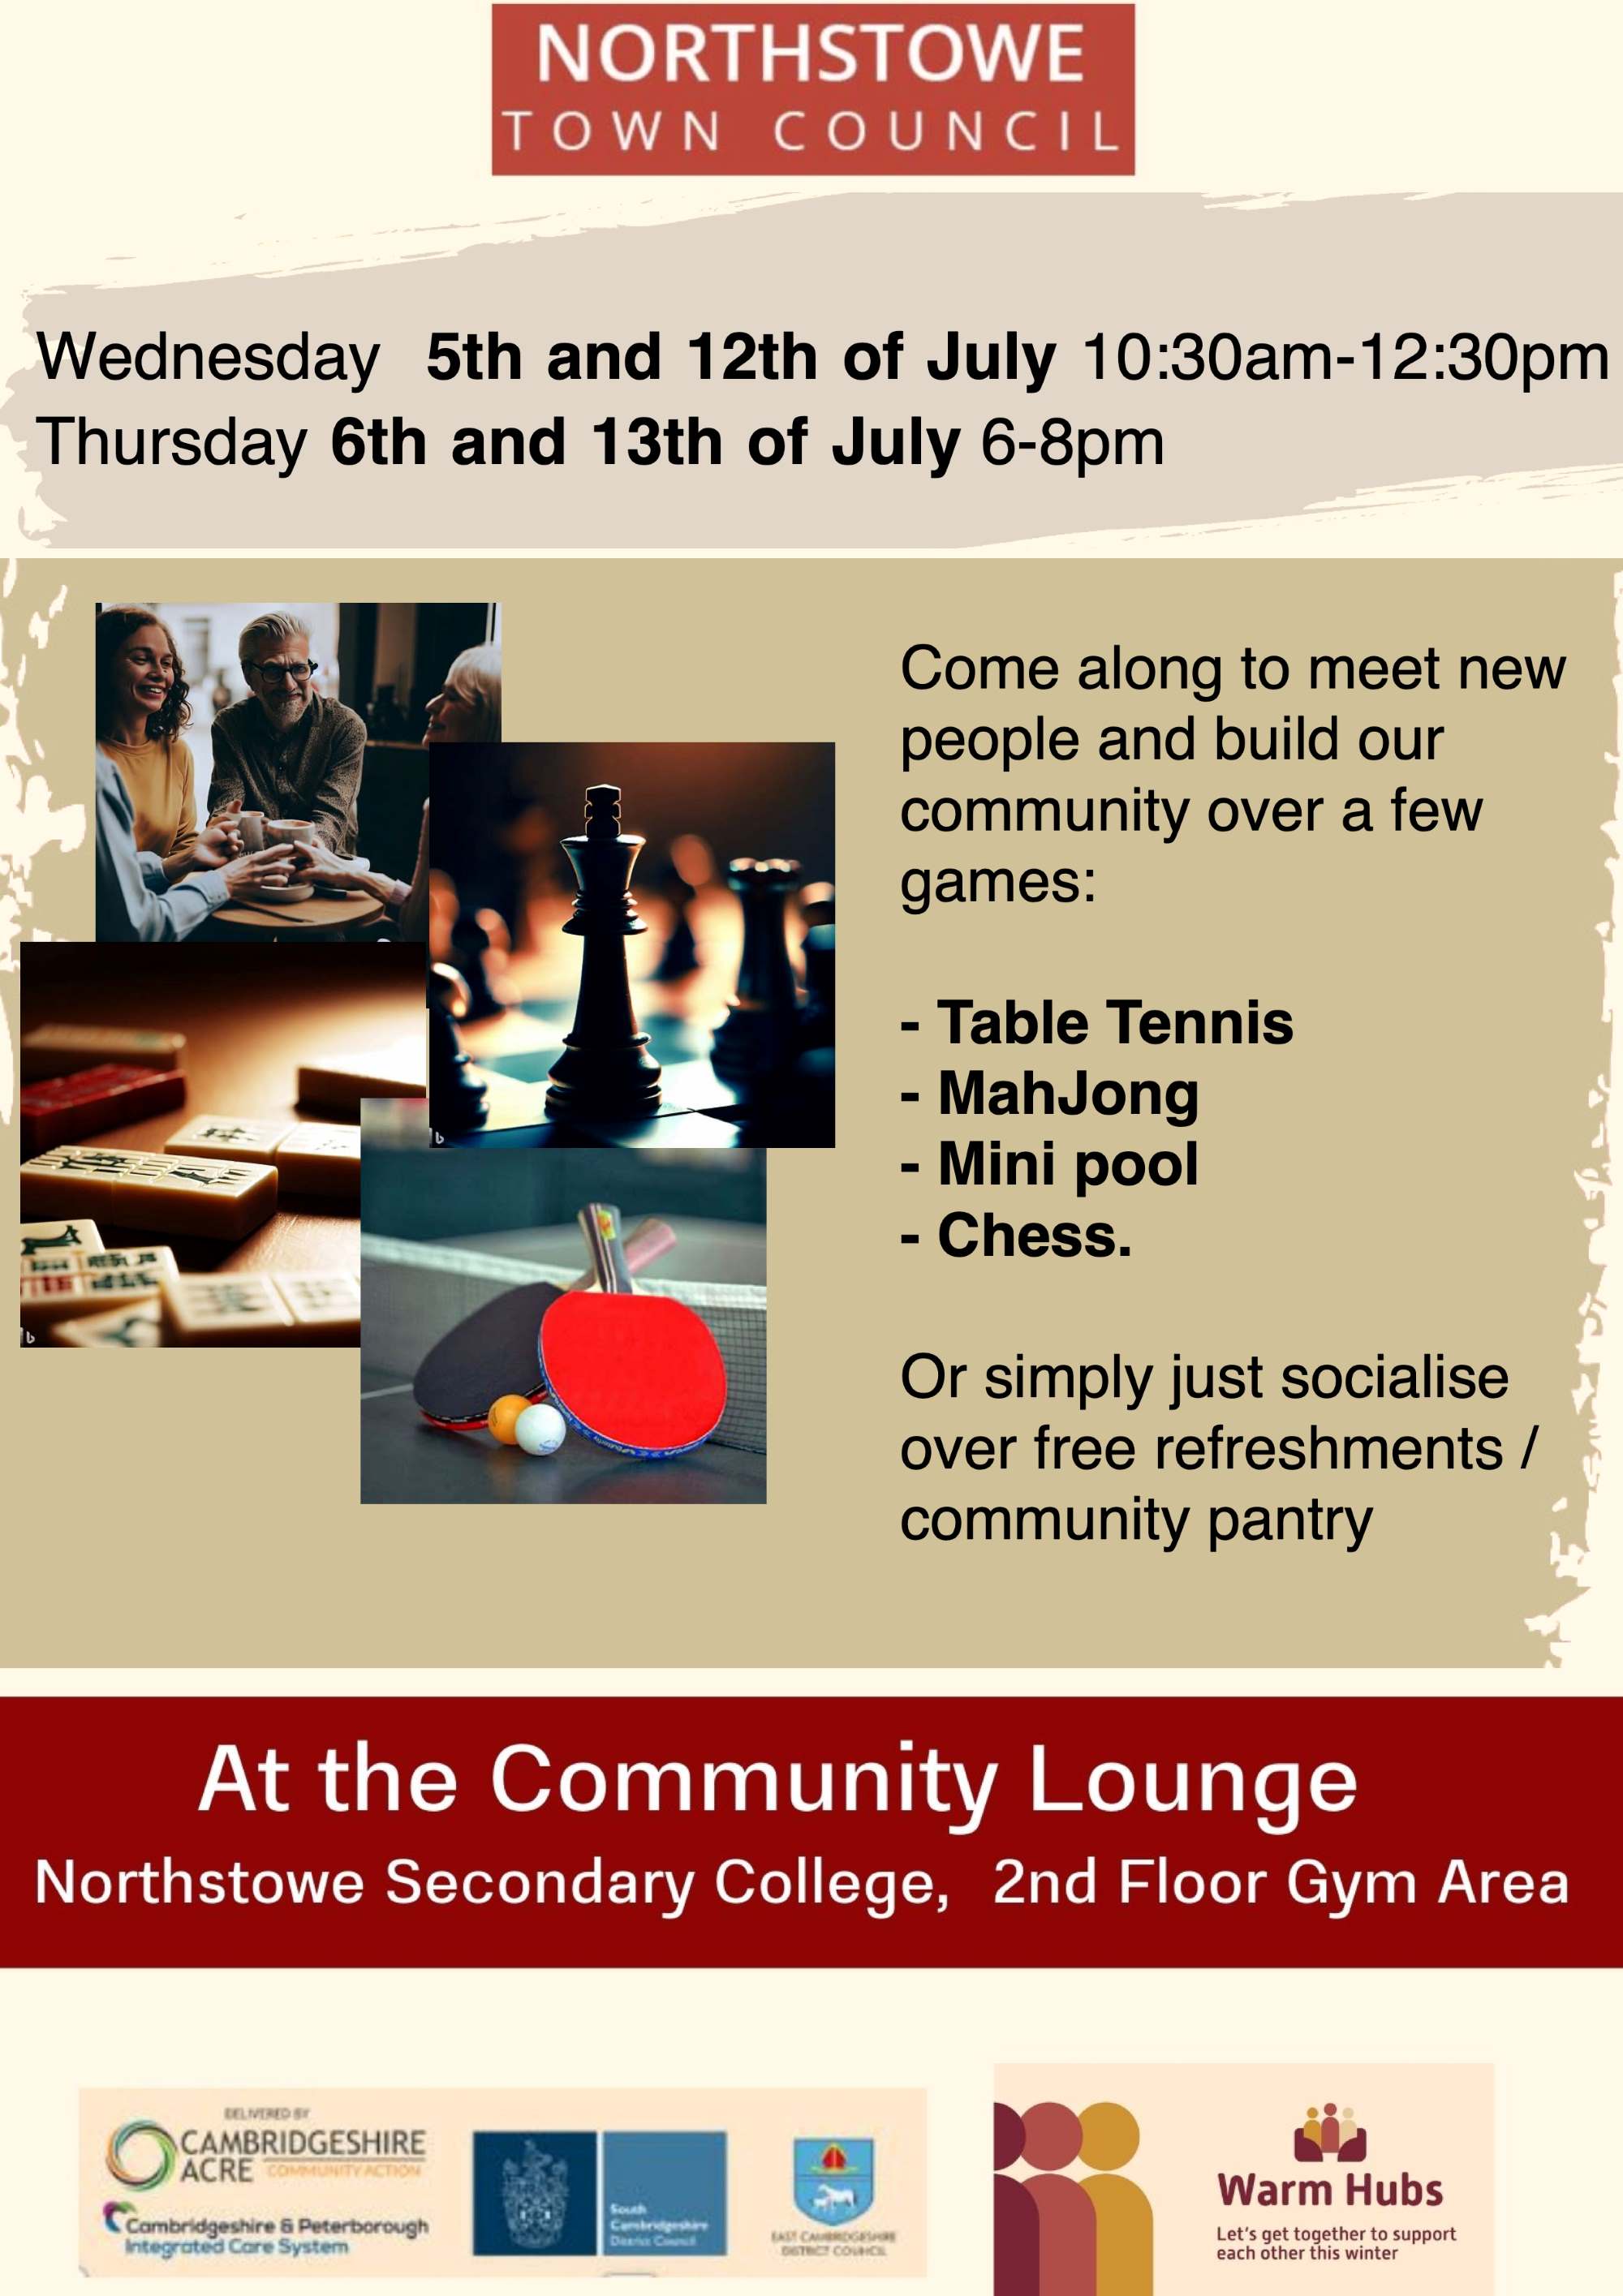 Community Lounge activities lined up in July